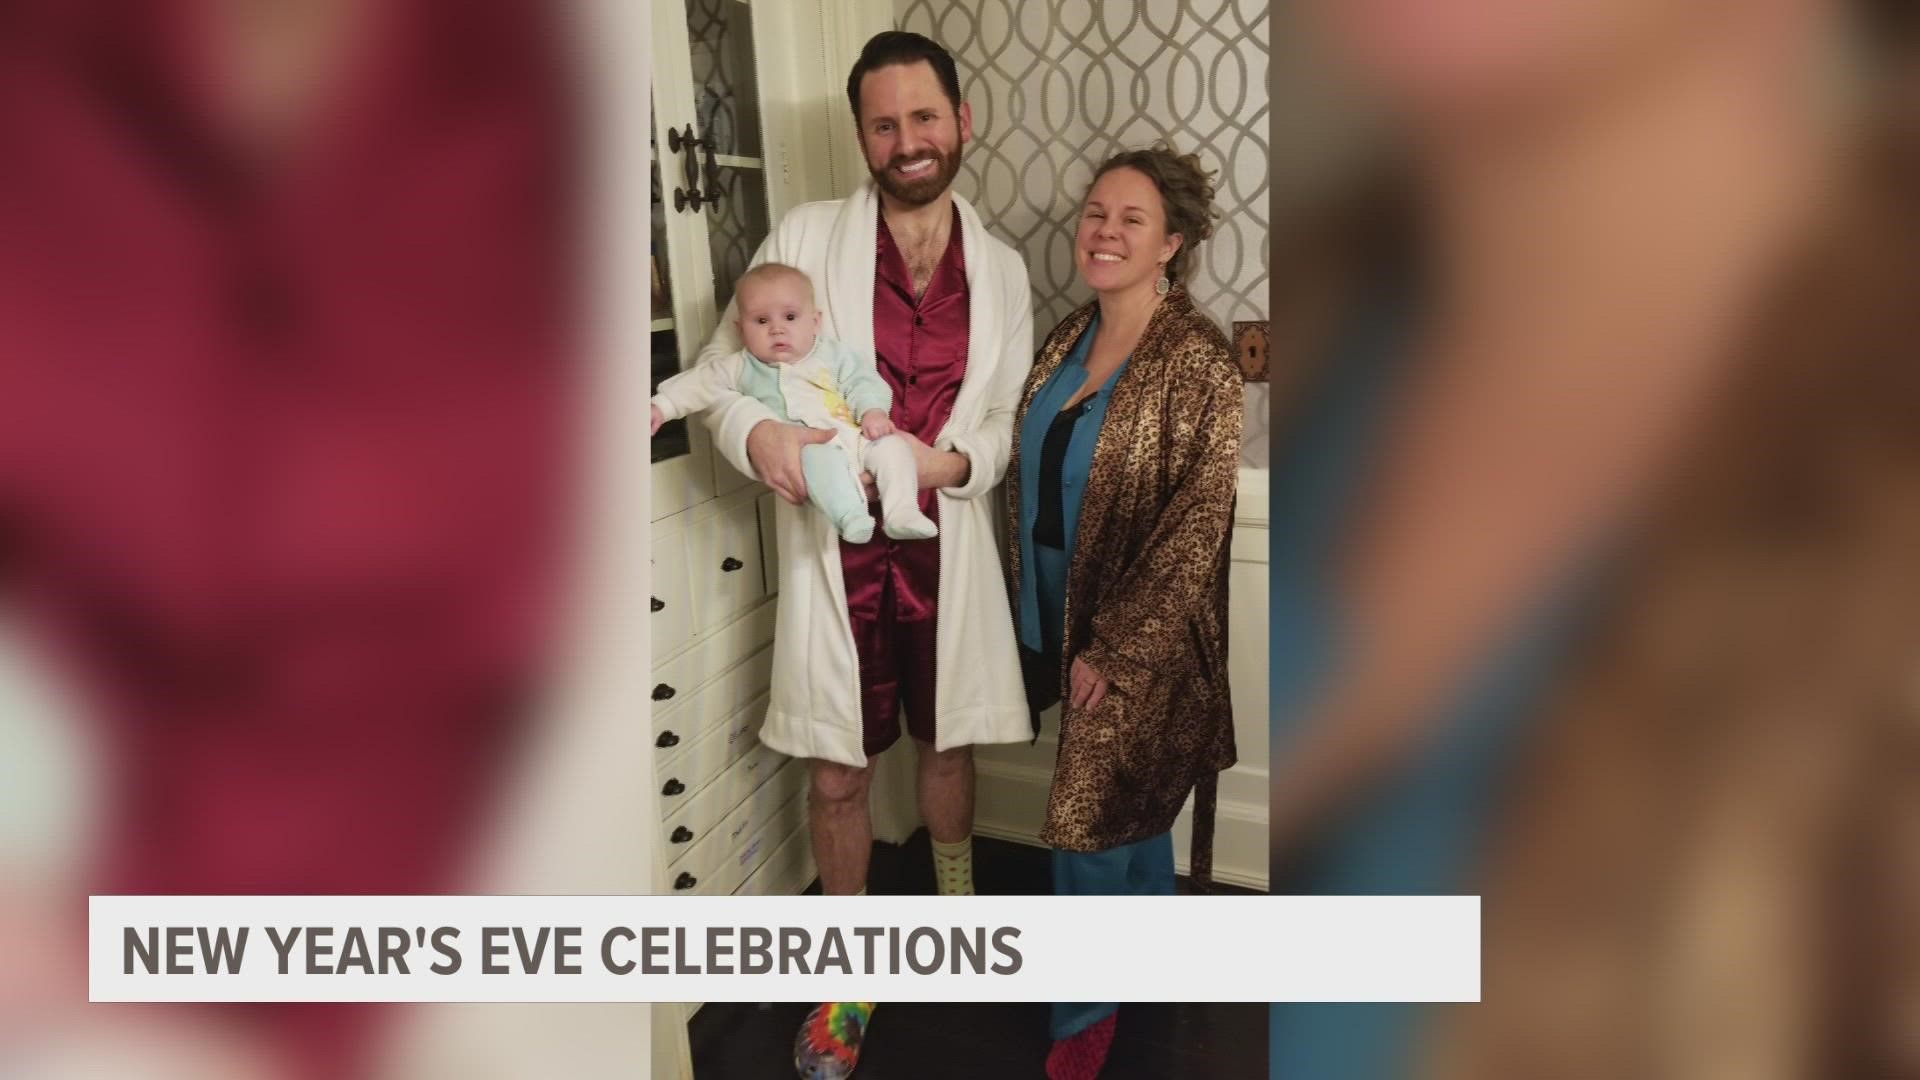 From special NYE dishes to banging pots and pans, Jay and Emily share their traditions to ring in the New Year.